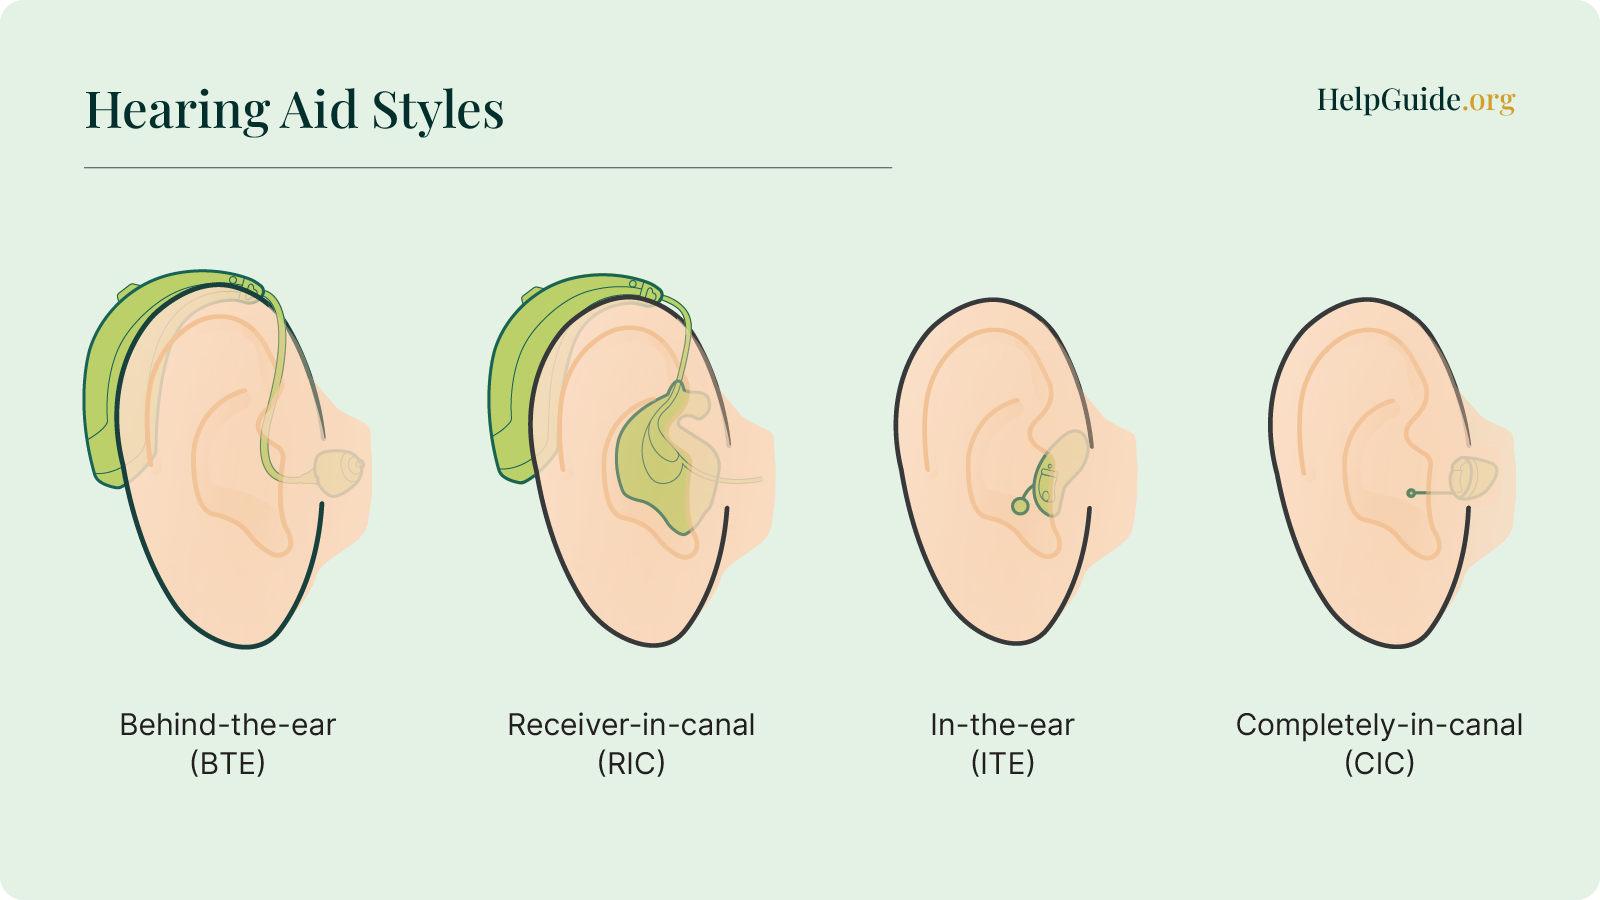 Hearing aid styles graphic